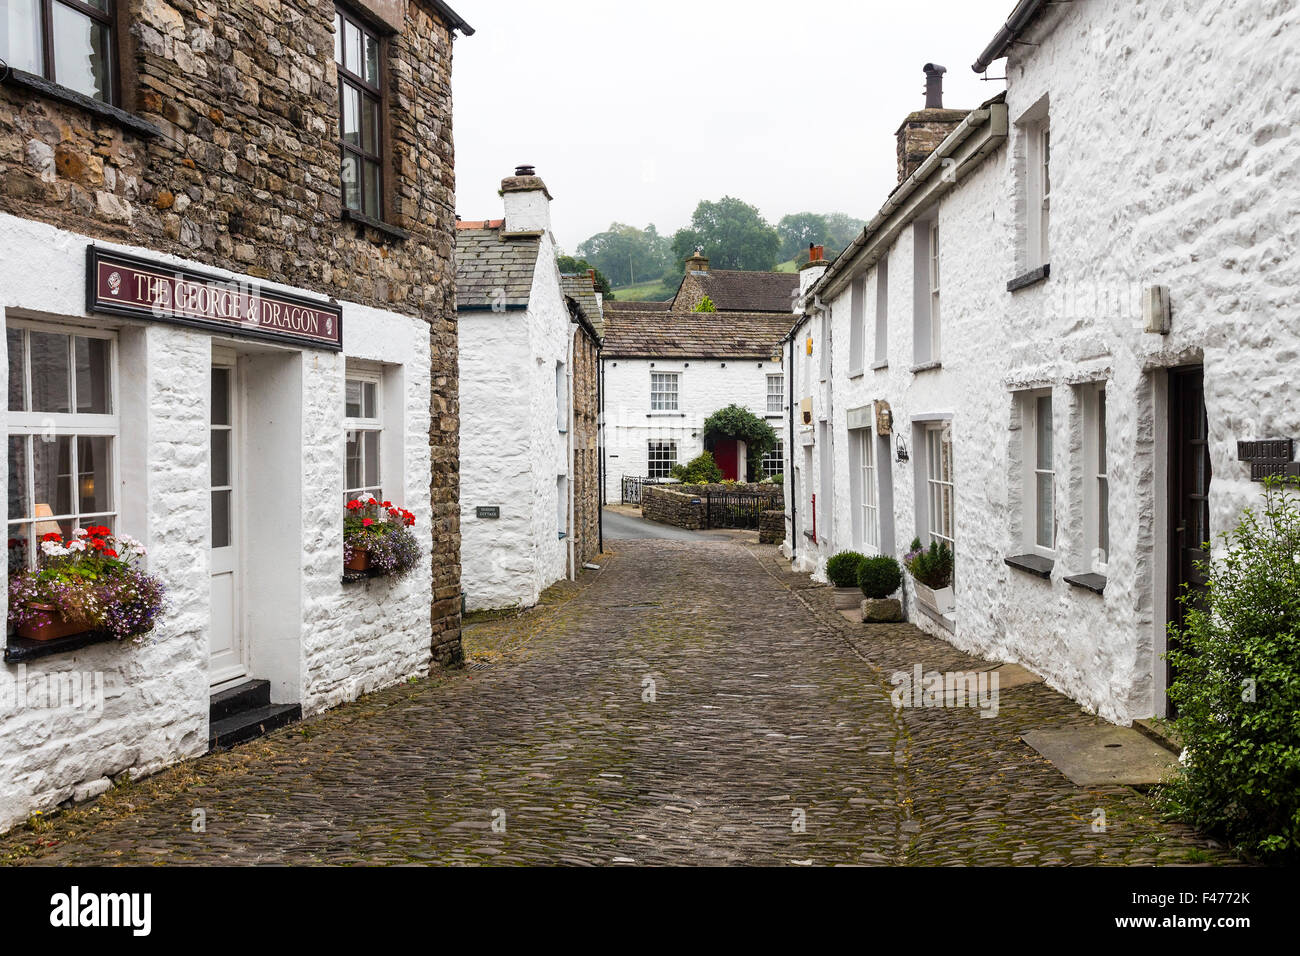 Whitewashed Cottages and Cobbled Street in the Village of Dent, Dentdale, Cumbria, UK Stock Photo